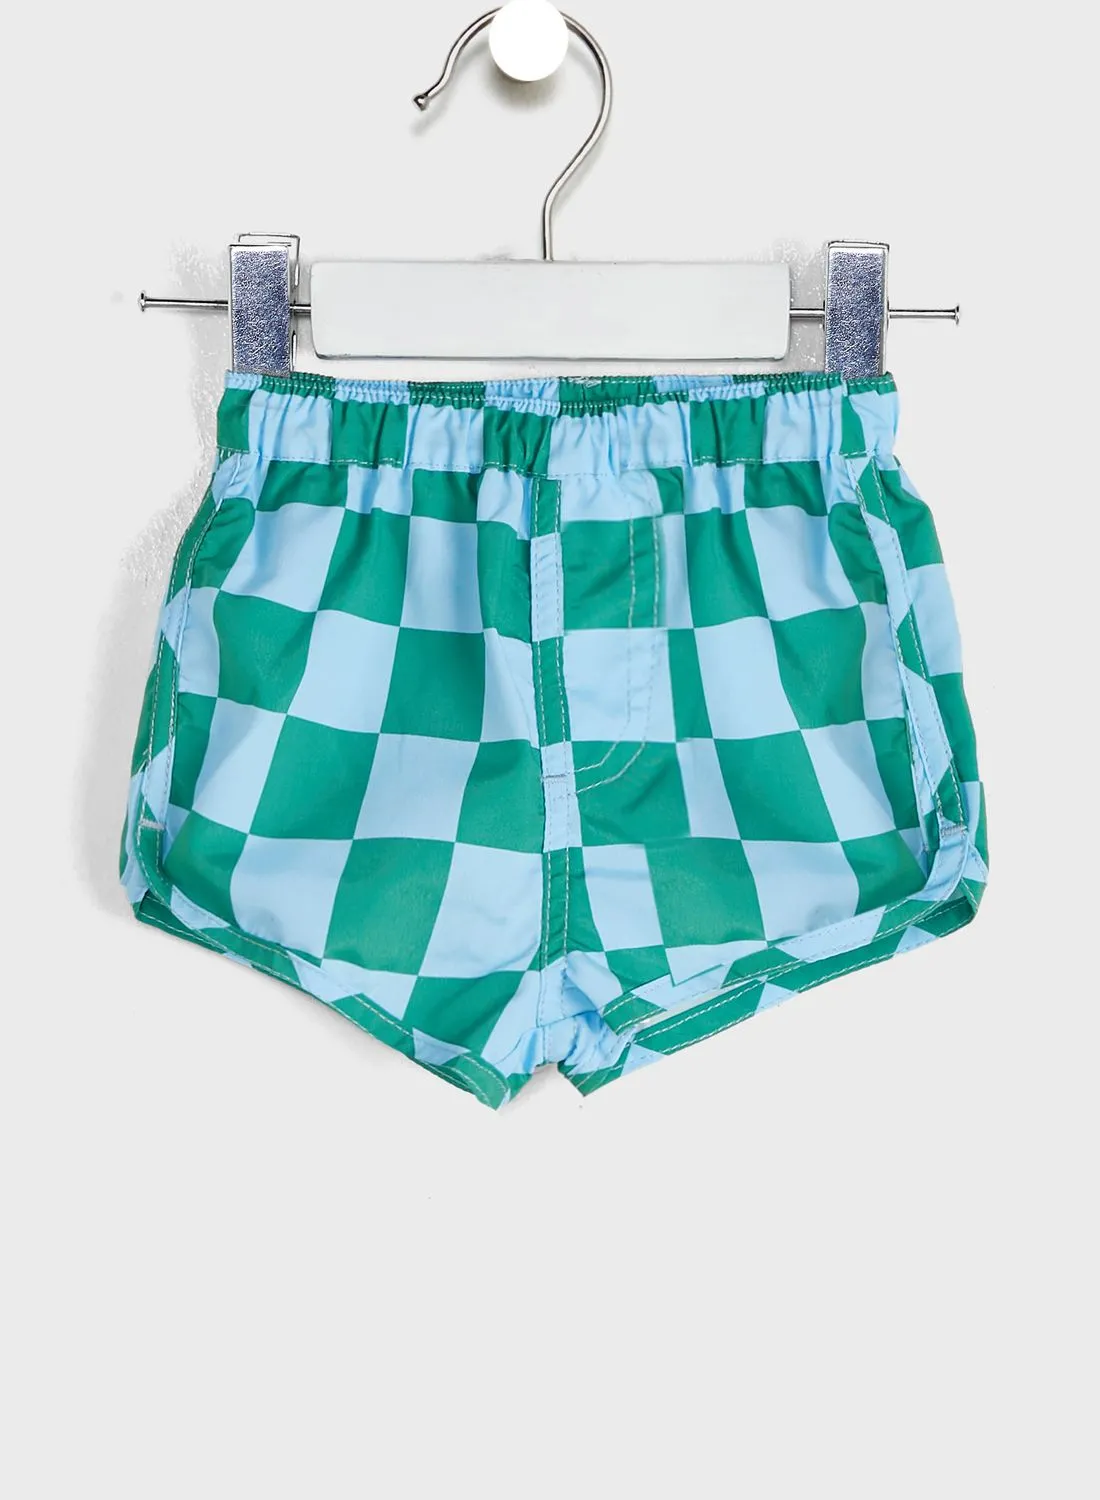 Cotton On Kids Checked Shorts